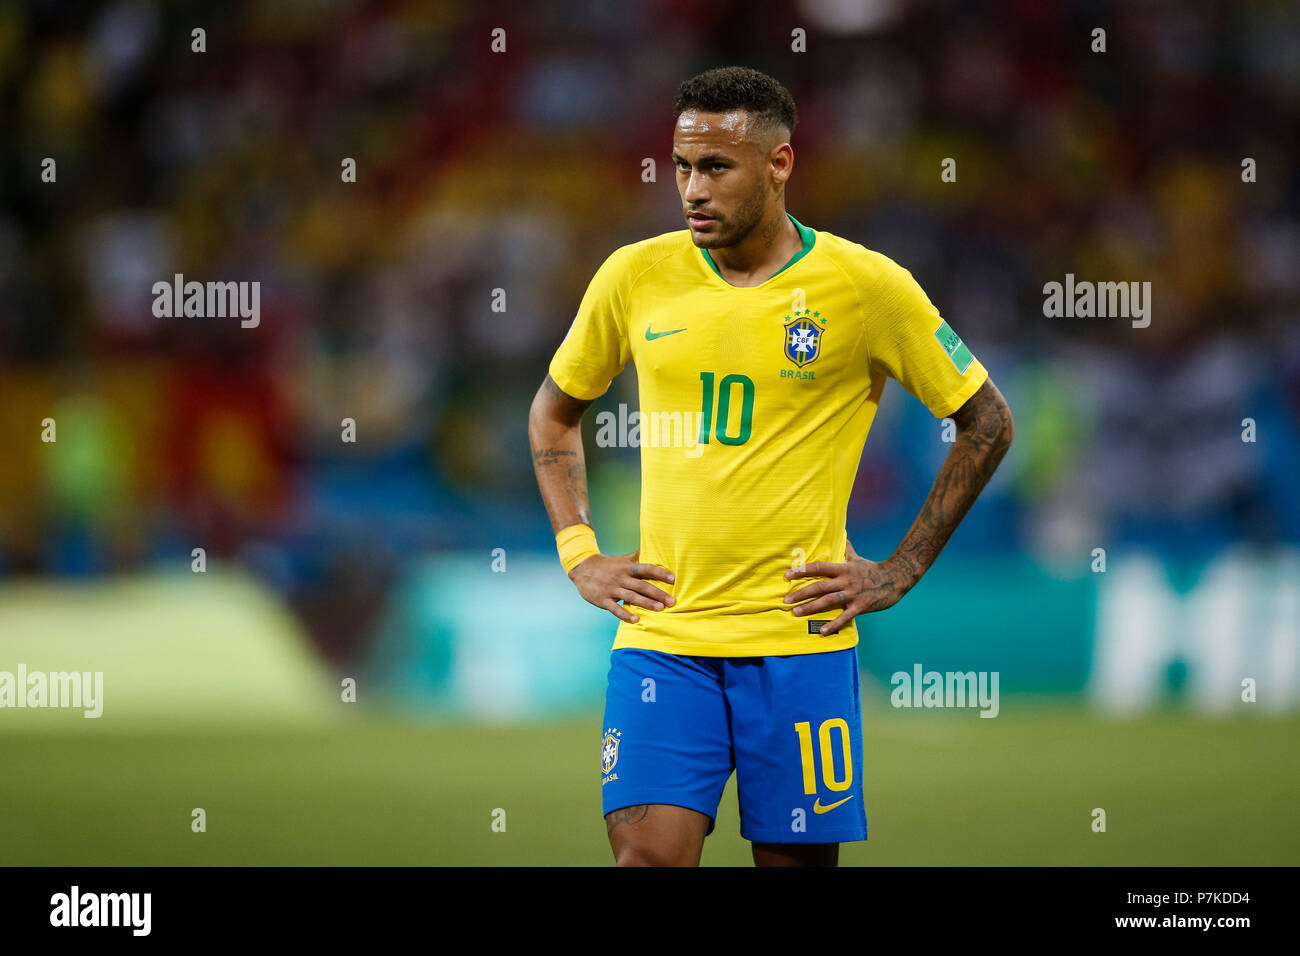 Neymar of Brazil looks dejected during the 2018 FIFA World Cup Quarter Final match between Brazil and Belgium at Kazan Arena on July 6th 2018 in Kazan, Russia